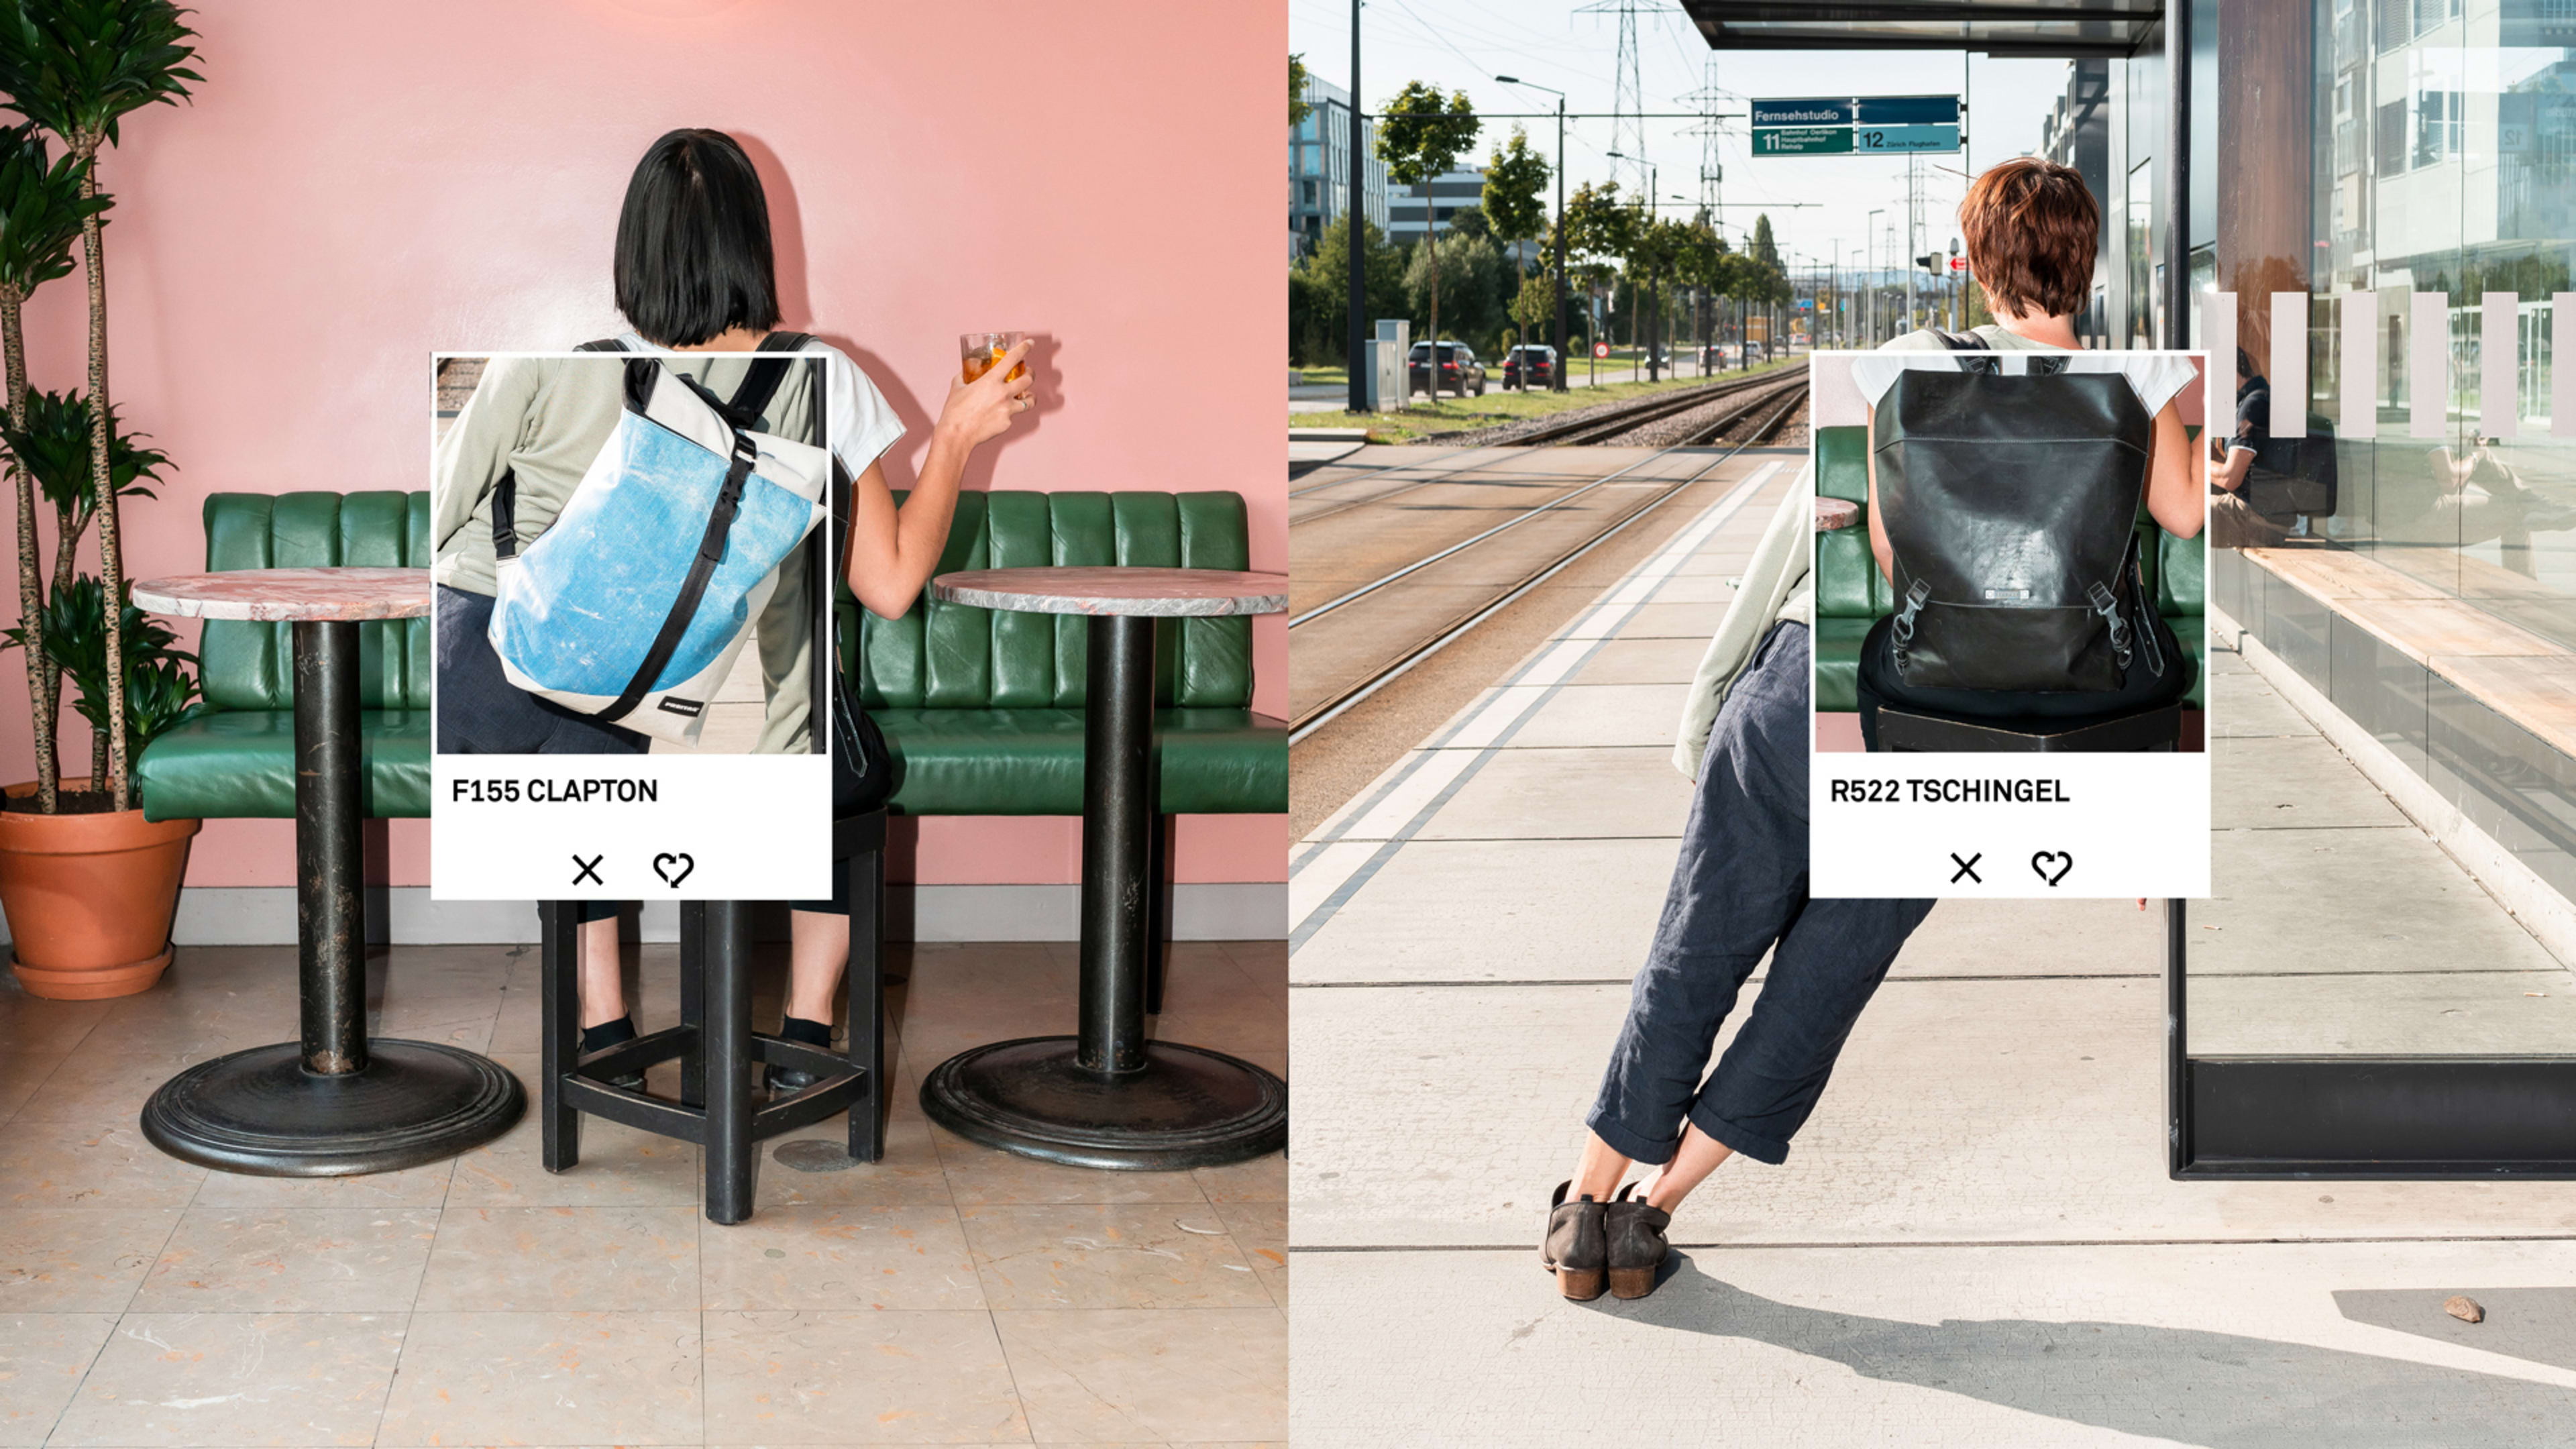 Freitag’s new ‘anti-shop’ lets you trade backpacks instead of buying a new one